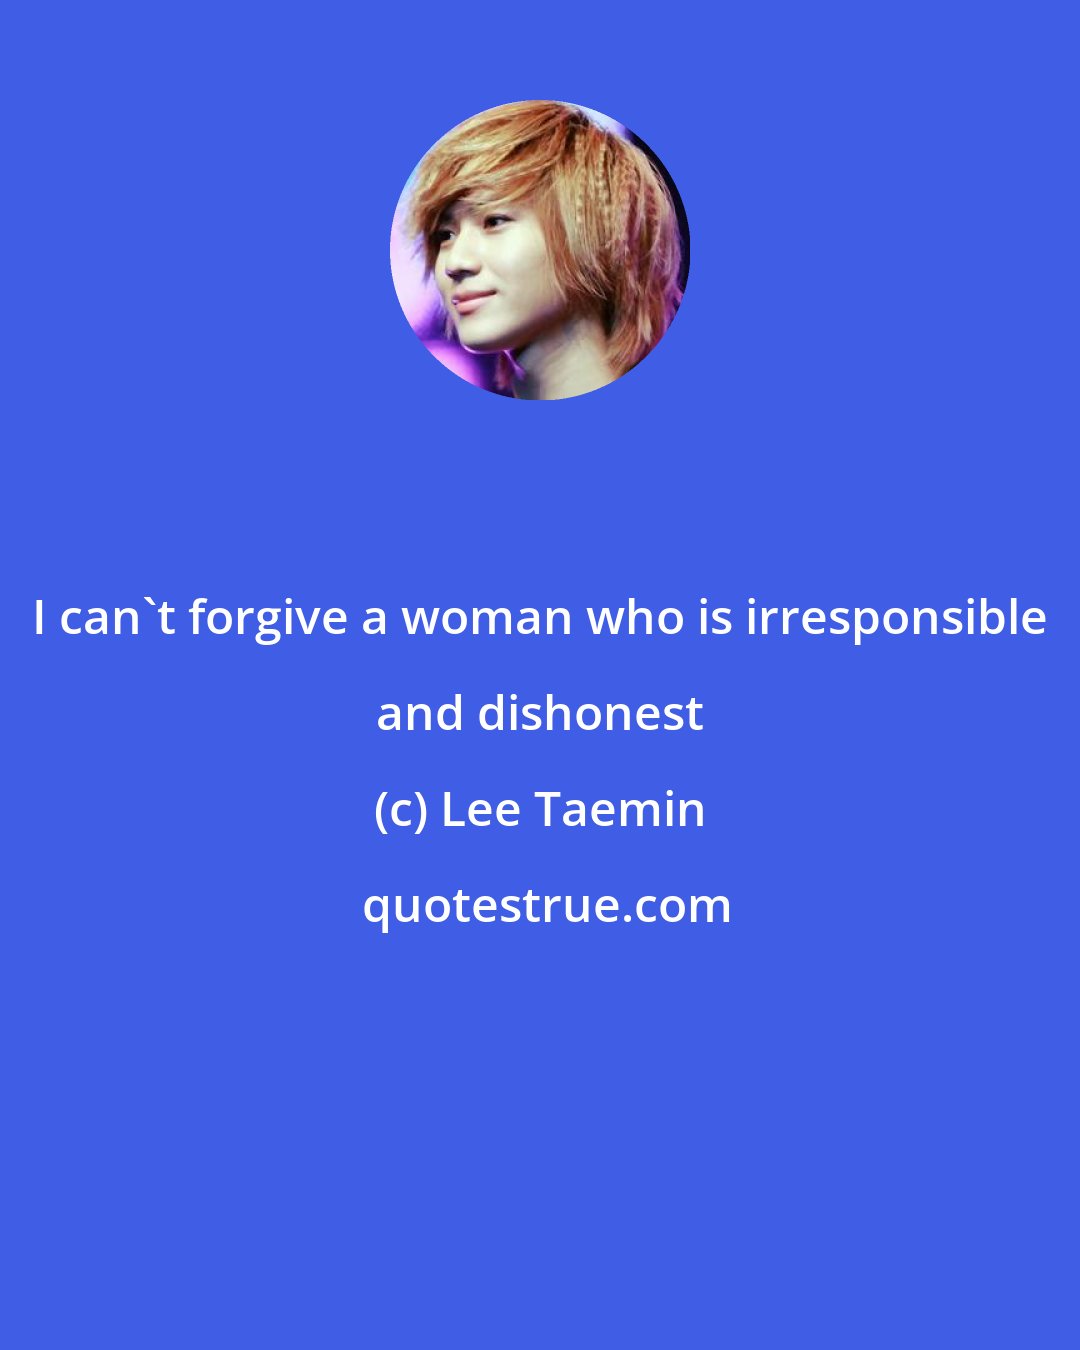 Lee Taemin: I can't forgive a woman who is irresponsible and dishonest